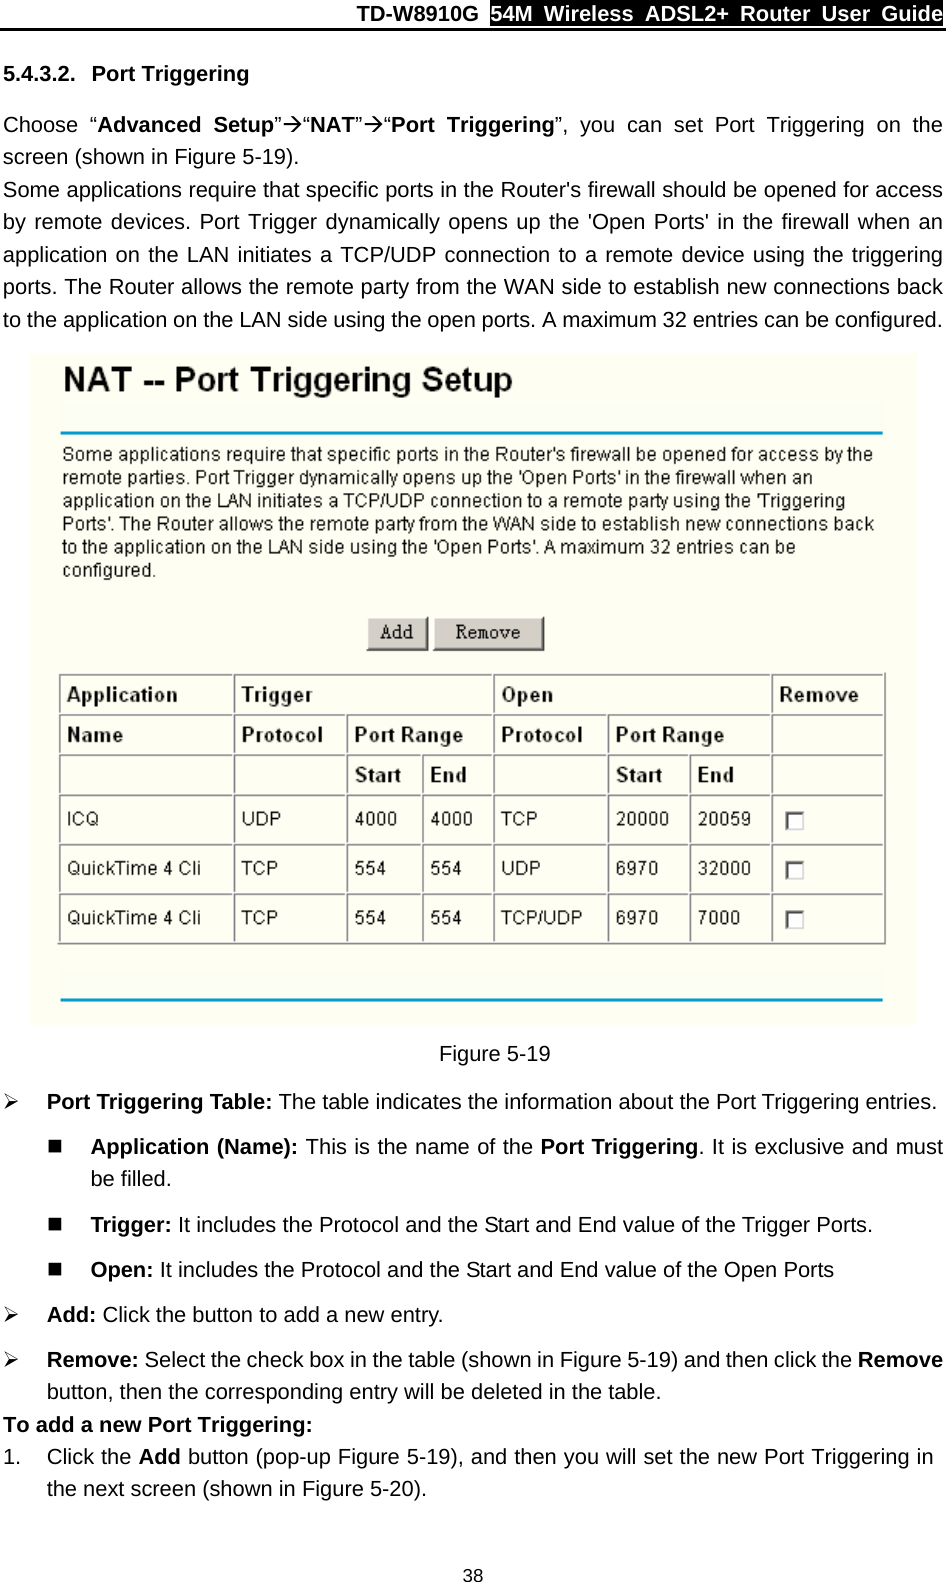 TD-W8910G  54M Wireless ADSL2+ Router User Guide  385.4.3.2. Port Triggering Choose “Advanced Setup”Æ“NAT”Æ“Port Triggering”, you can set Port Triggering on the screen (shown in Figure 5-19). Some applications require that specific ports in the Router&apos;s firewall should be opened for access by remote devices. Port Trigger dynamically opens up the &apos;Open Ports&apos; in the firewall when an application on the LAN initiates a TCP/UDP connection to a remote device using the triggering ports. The Router allows the remote party from the WAN side to establish new connections back to the application on the LAN side using the open ports. A maximum 32 entries can be configured.  Figure 5-19 ¾ Port Triggering Table: The table indicates the information about the Port Triggering entries.  Application (Name): This is the name of the Port Triggering. It is exclusive and must be filled.  Trigger: It includes the Protocol and the Start and End value of the Trigger Ports.  Open: It includes the Protocol and the Start and End value of the Open Ports ¾ Add: Click the button to add a new entry. ¾ Remove: Select the check box in the table (shown in Figure 5-19) and then click the Remove button, then the corresponding entry will be deleted in the table. To add a new Port Triggering: 1. Click the Add button (pop-up Figure 5-19), and then you will set the new Port Triggering in the next screen (shown in Figure 5-20). 